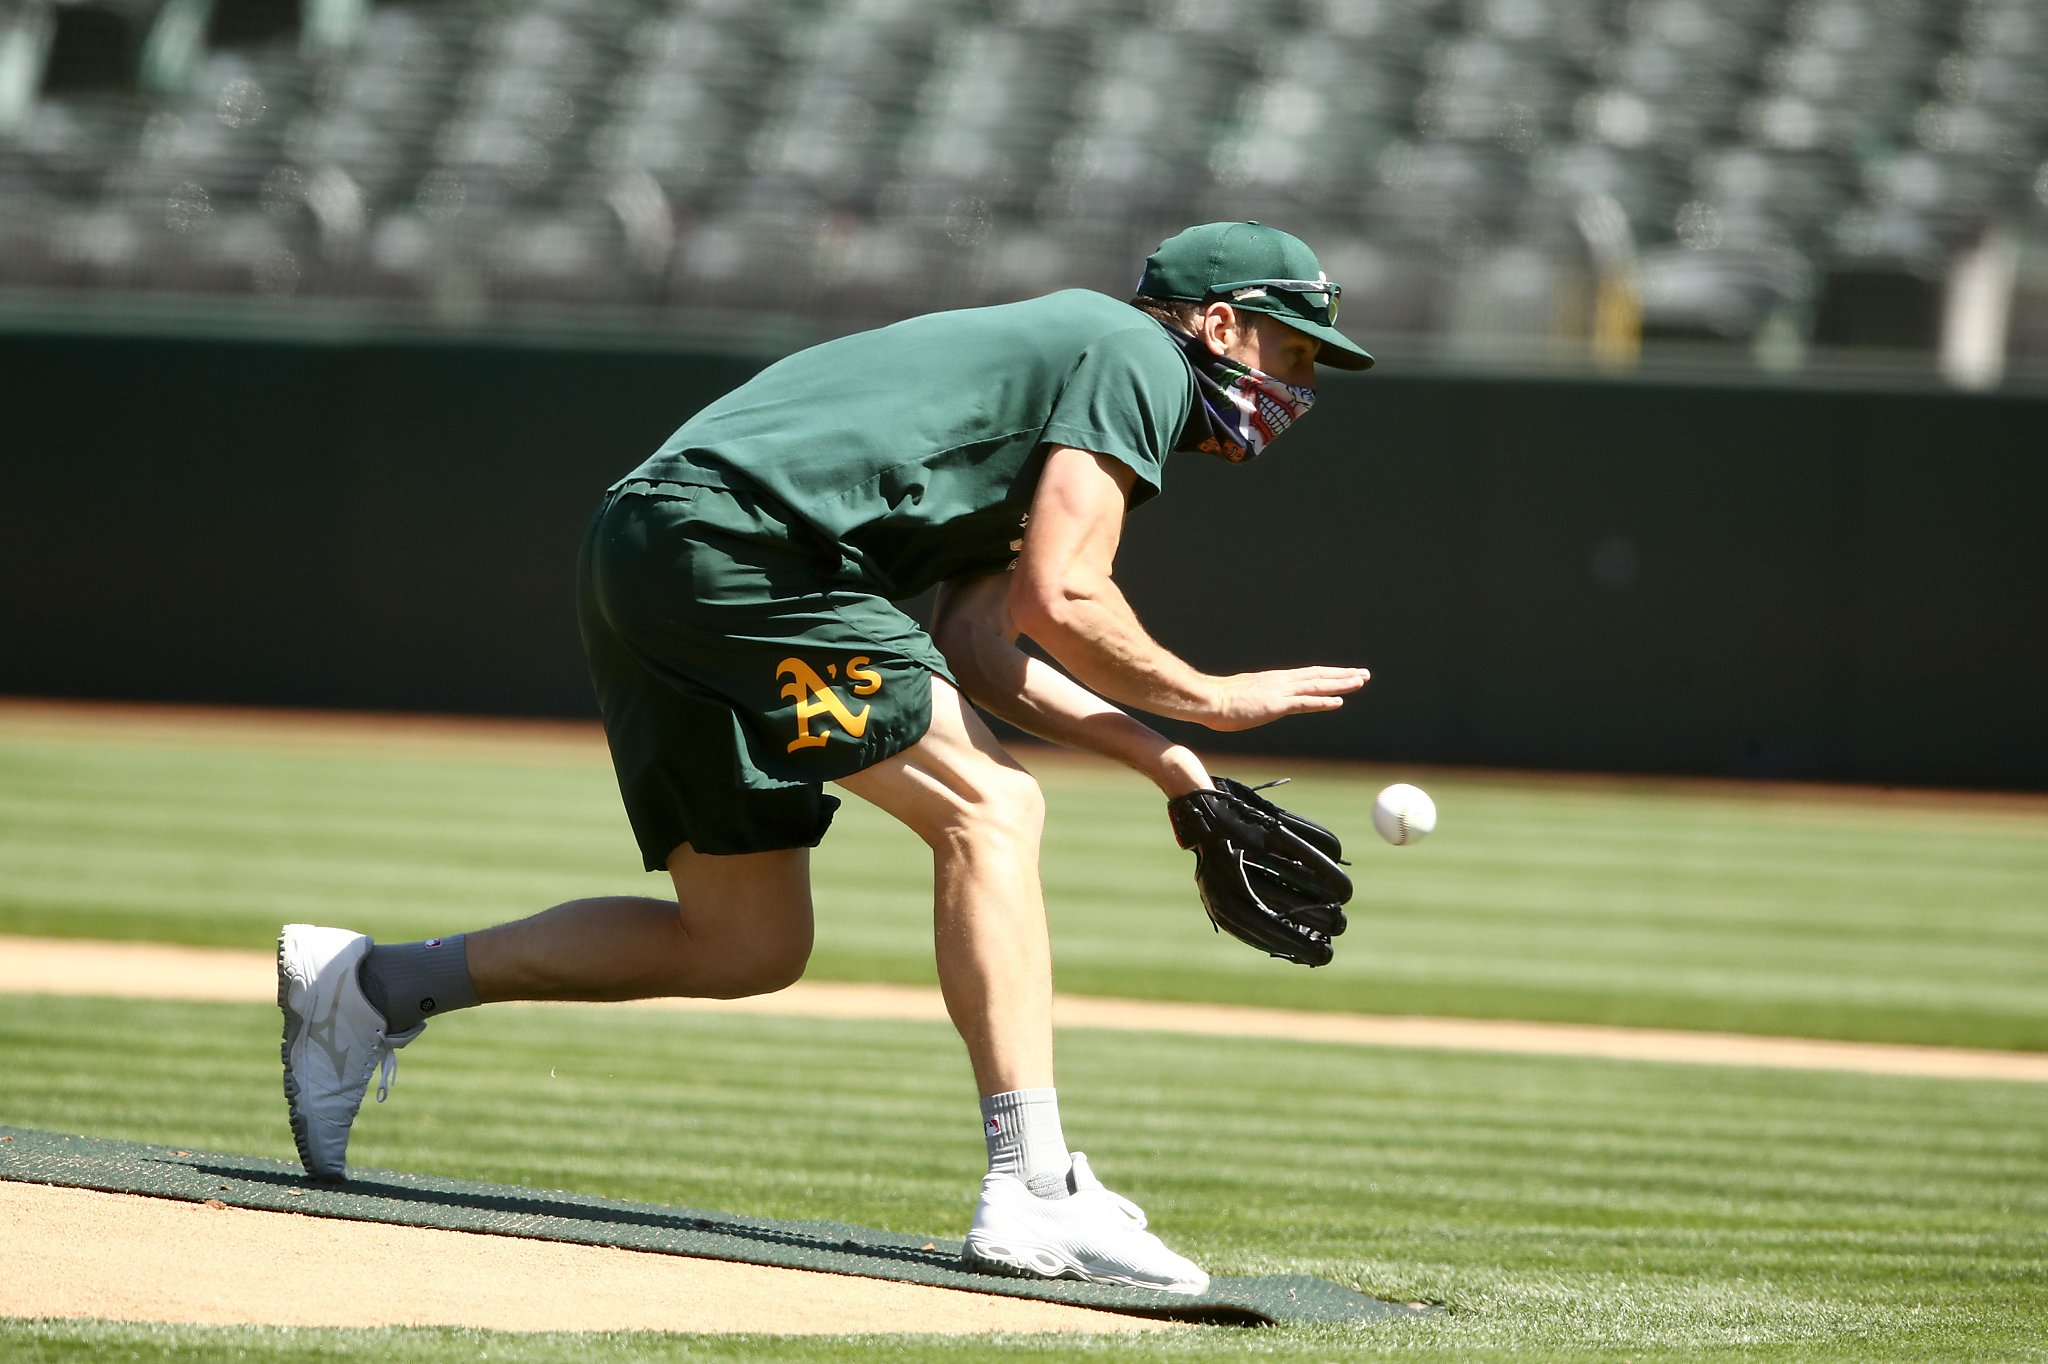 Chris Bassitt to start for A's Sunday; rest of rotation gets some rest